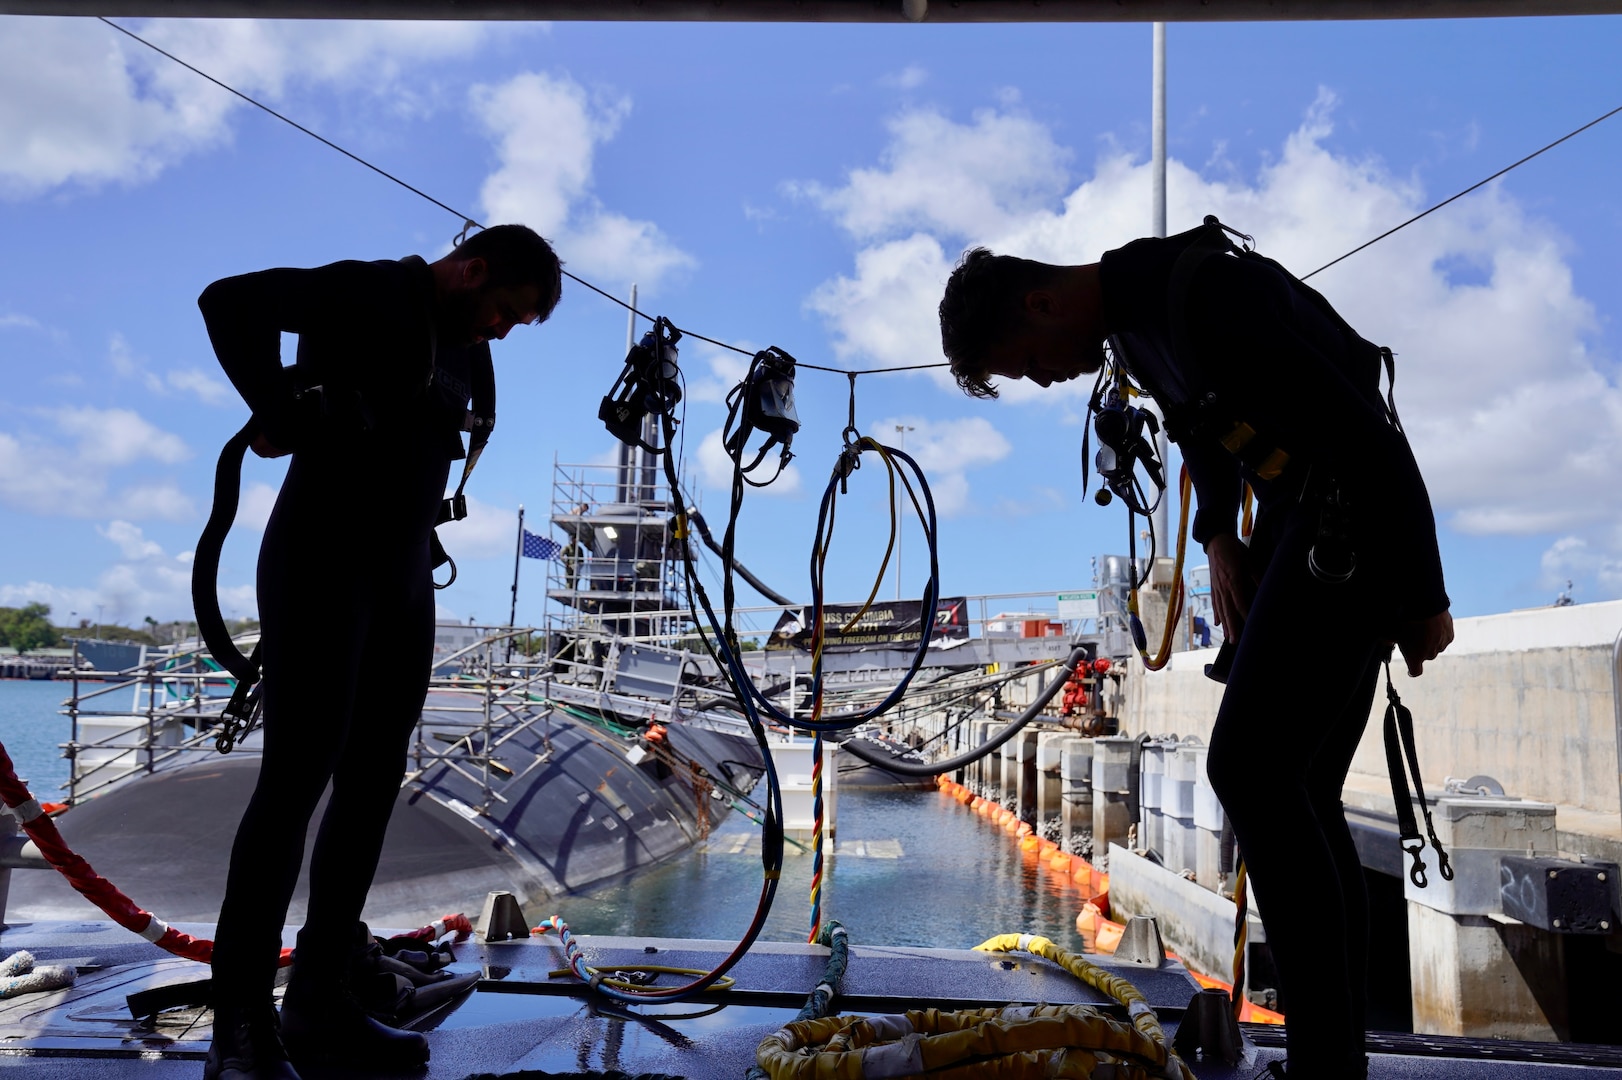 Royal Australian Navy divers don their equipment before entering the water during a familiarization dive with Pearl Harbor Naval Shipyard and Intermediate Maintenance Facility